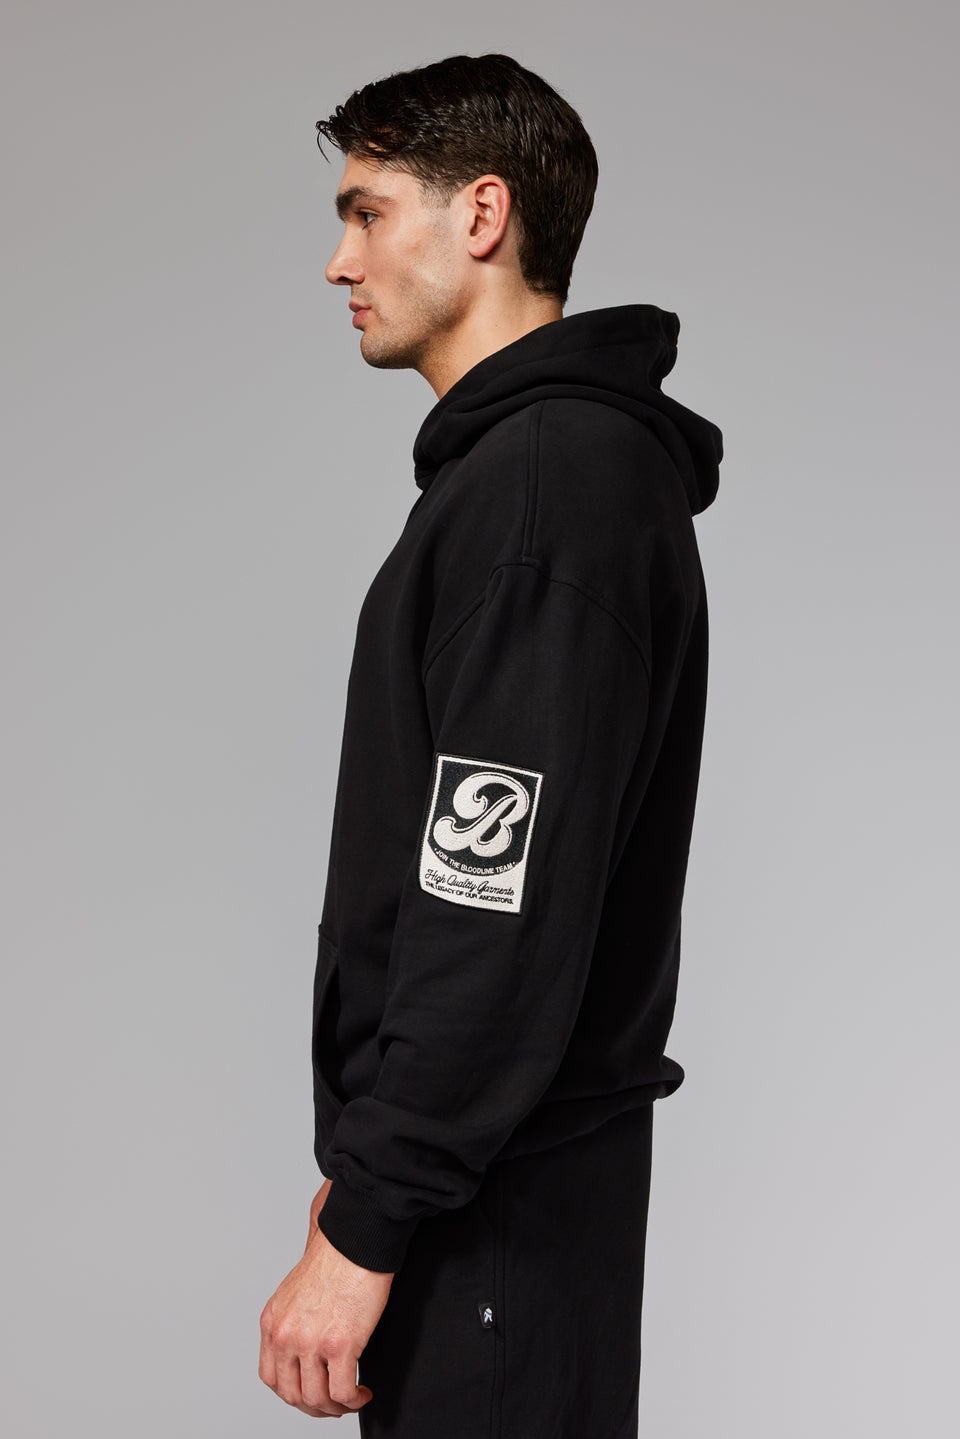 Illyrian SS24 Patch Hoodie - Black